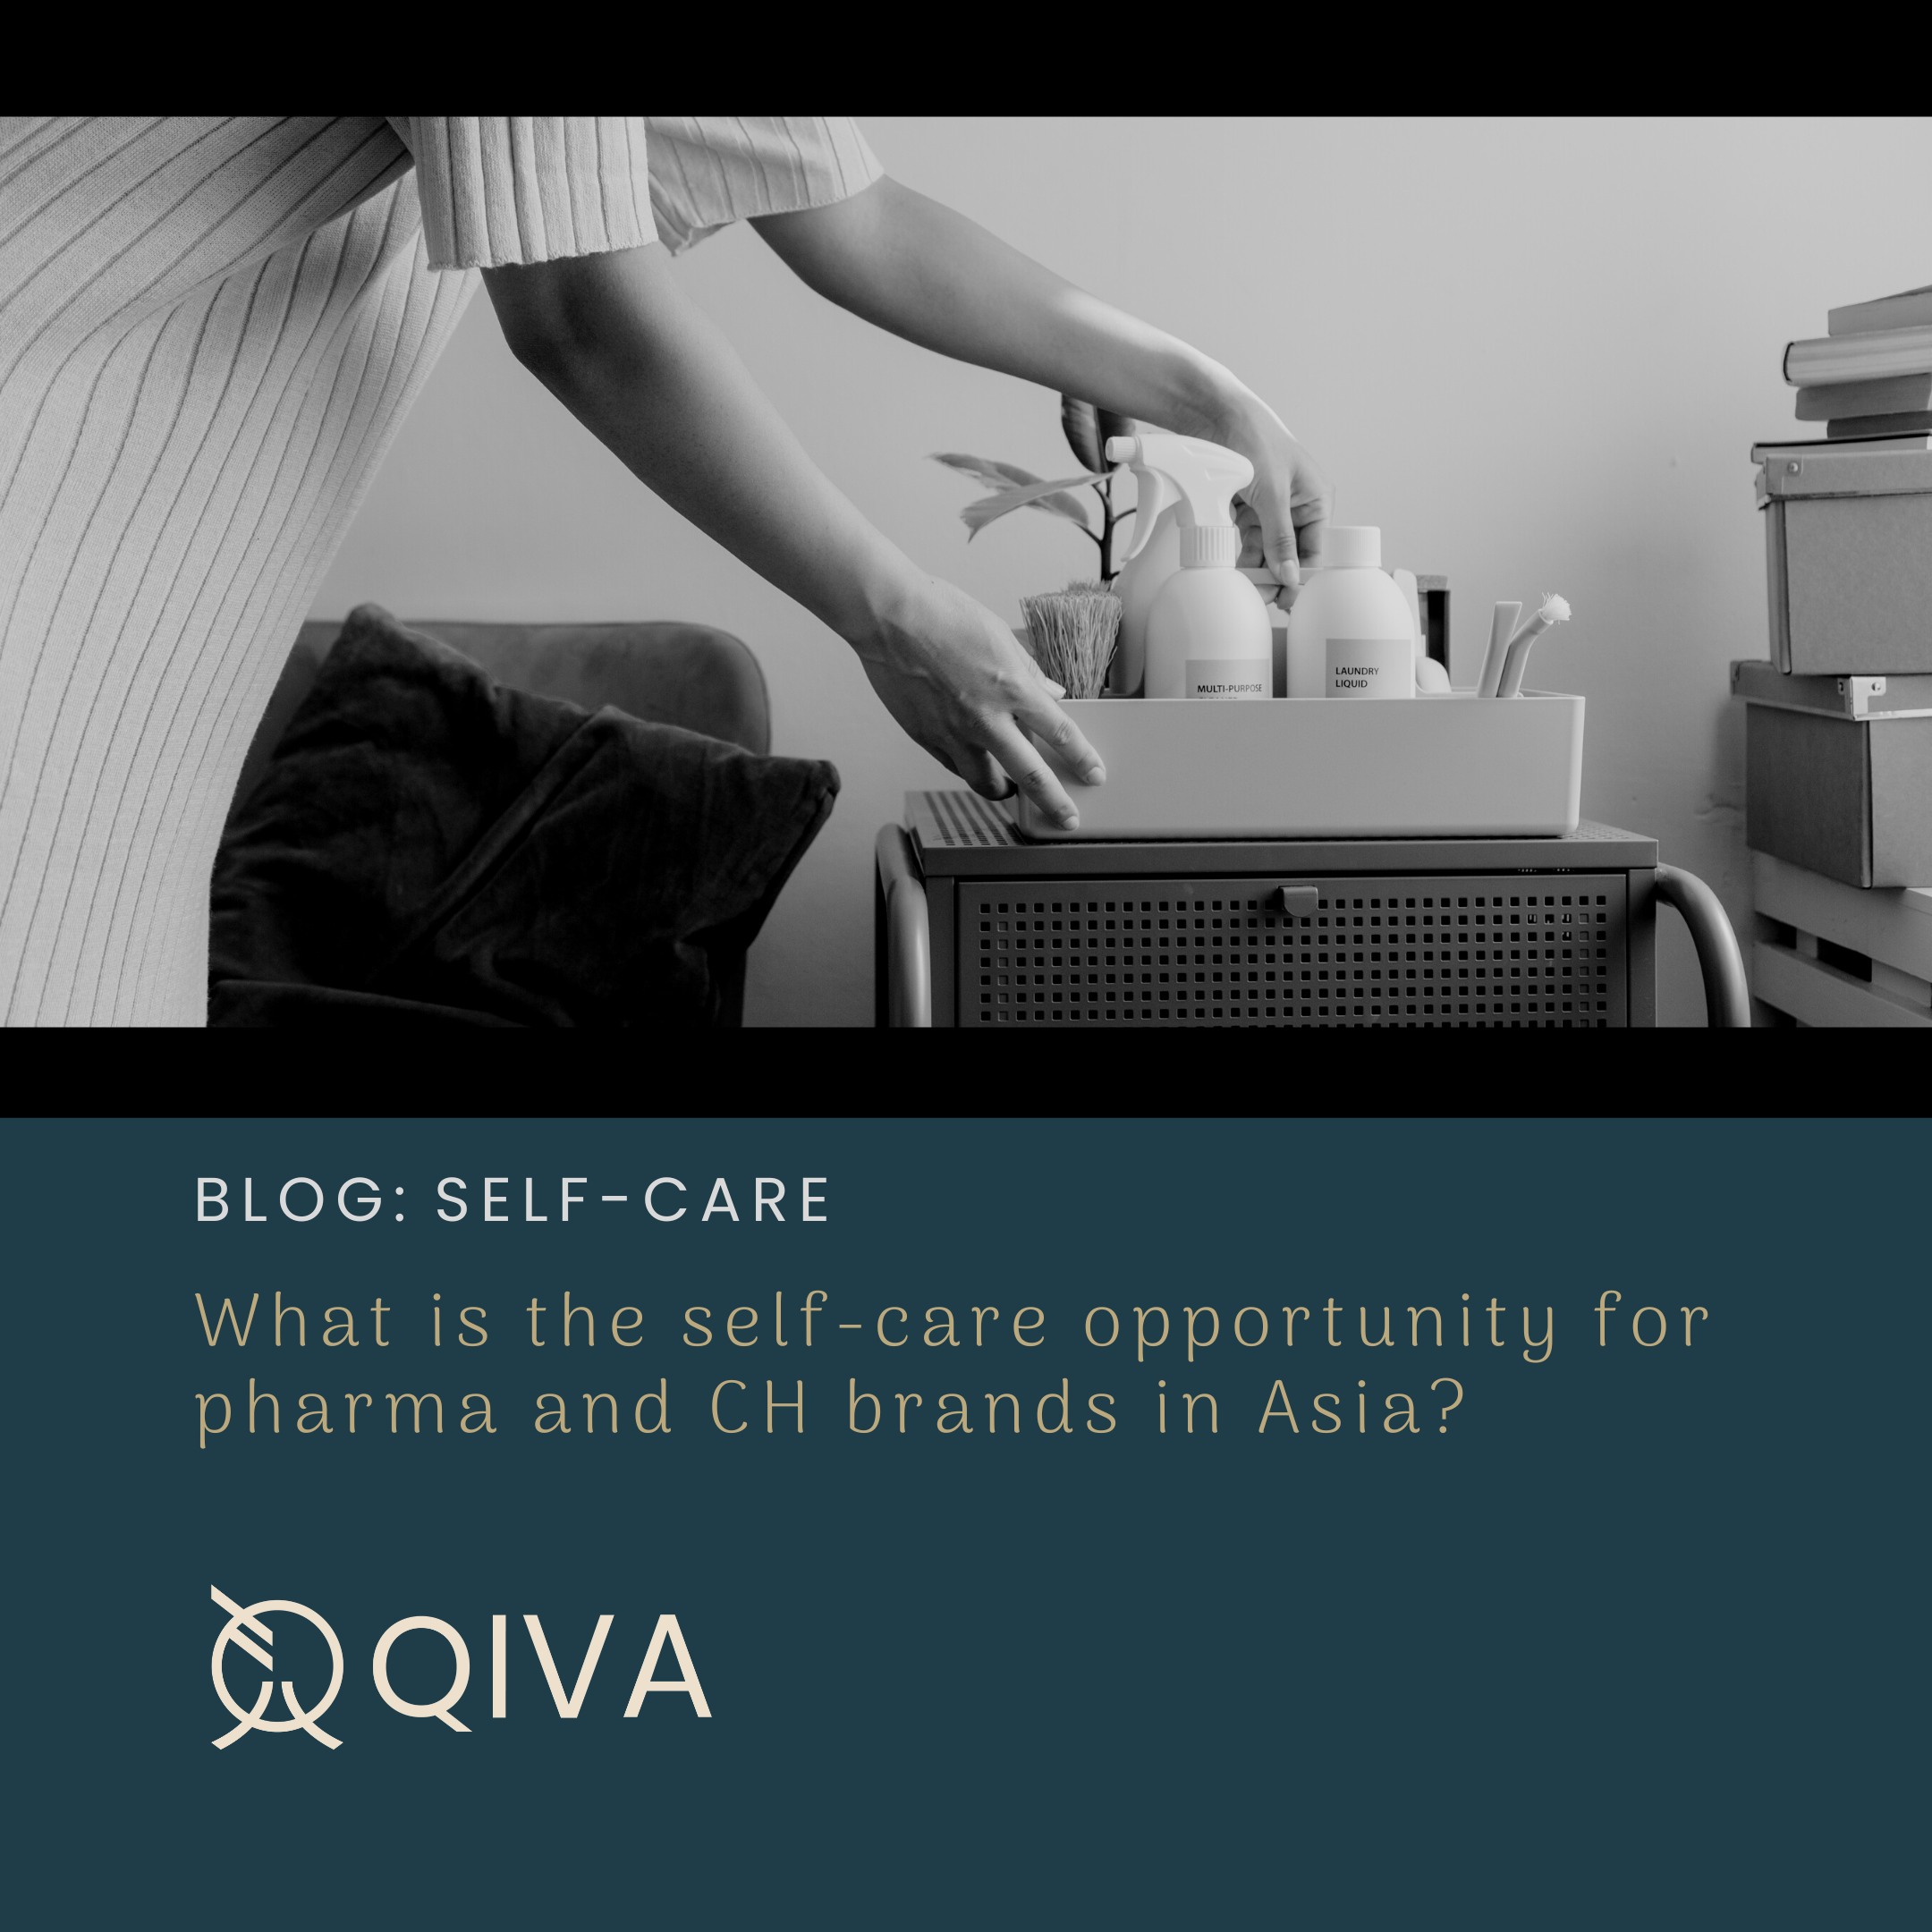 What is the self-care opportunity for pharma & CH brands in Asia?